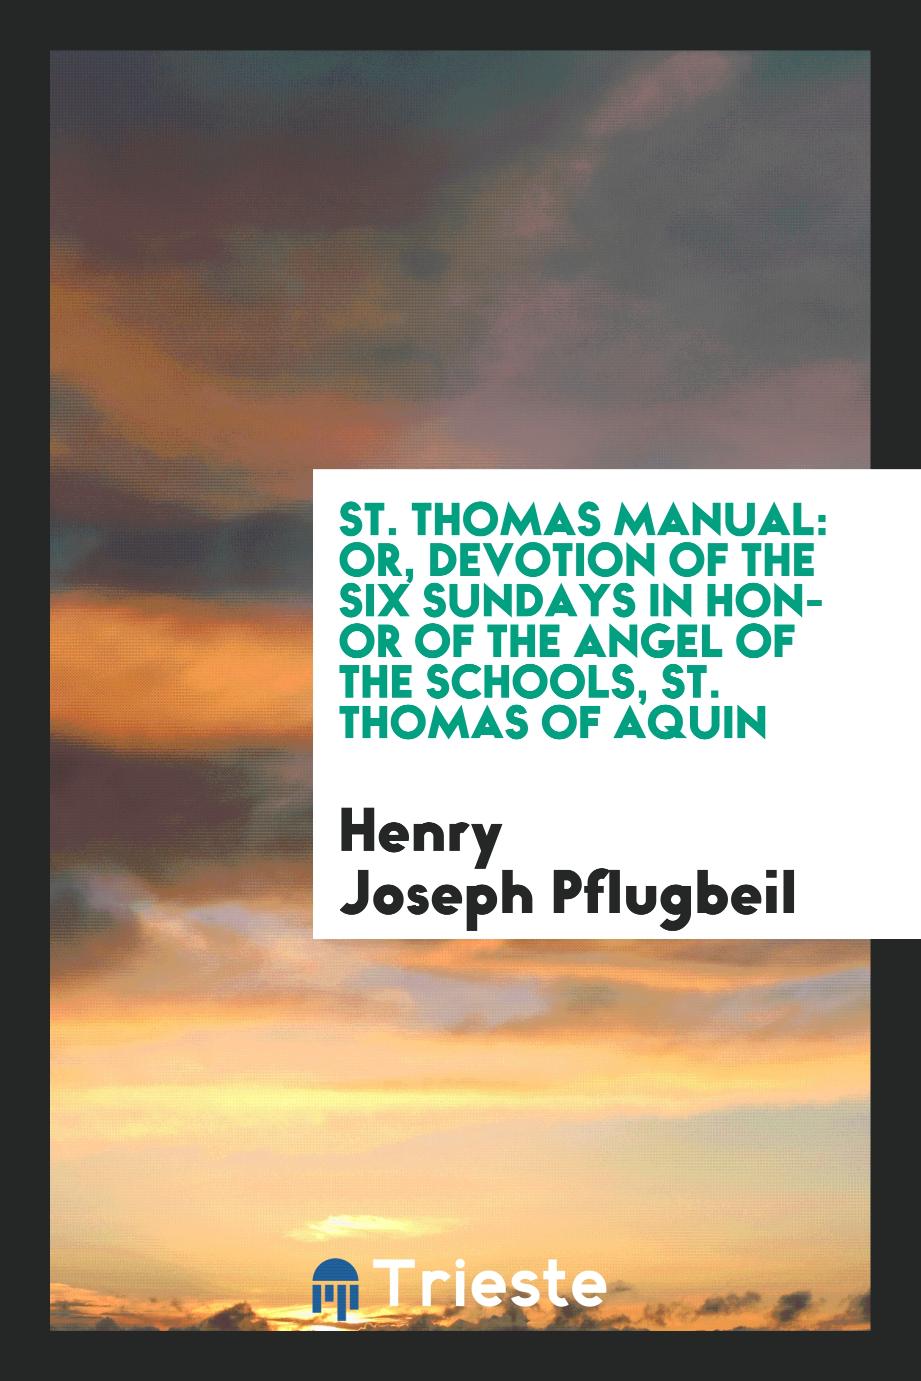 St. Thomas Manual: Or, Devotion of the Six Sundays in Honor of the Angel of the Schools, St. Thomas of Aquin